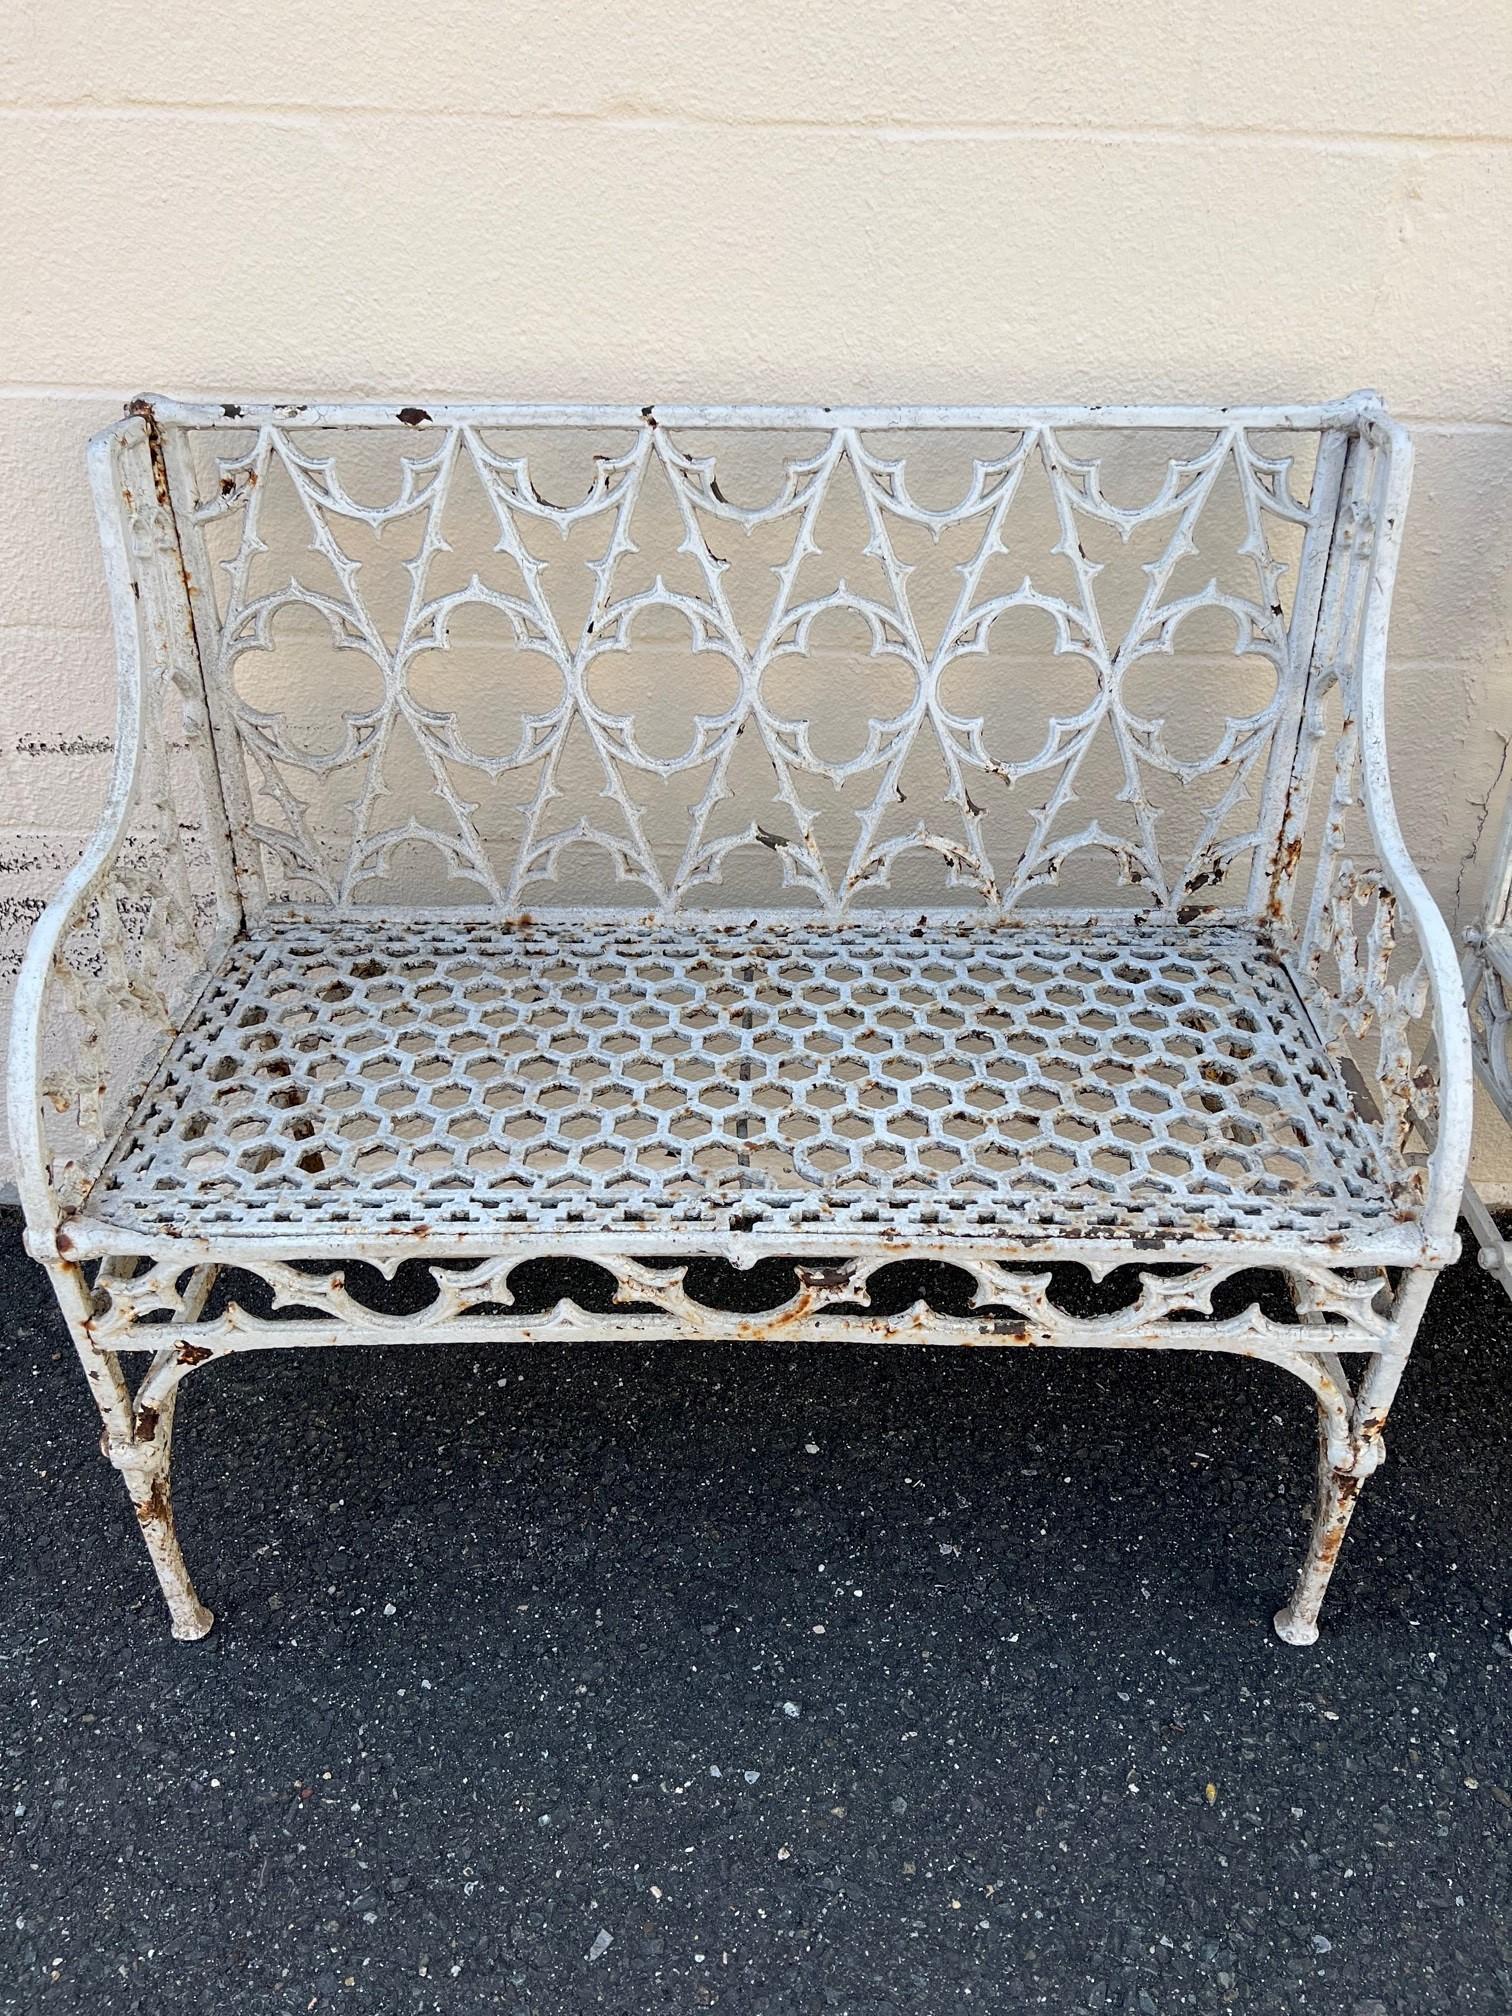 Antique Pair of English Coalbrookdale Style Iron Gothic Revival Garden Benches In Good Condition For Sale In Stamford, CT